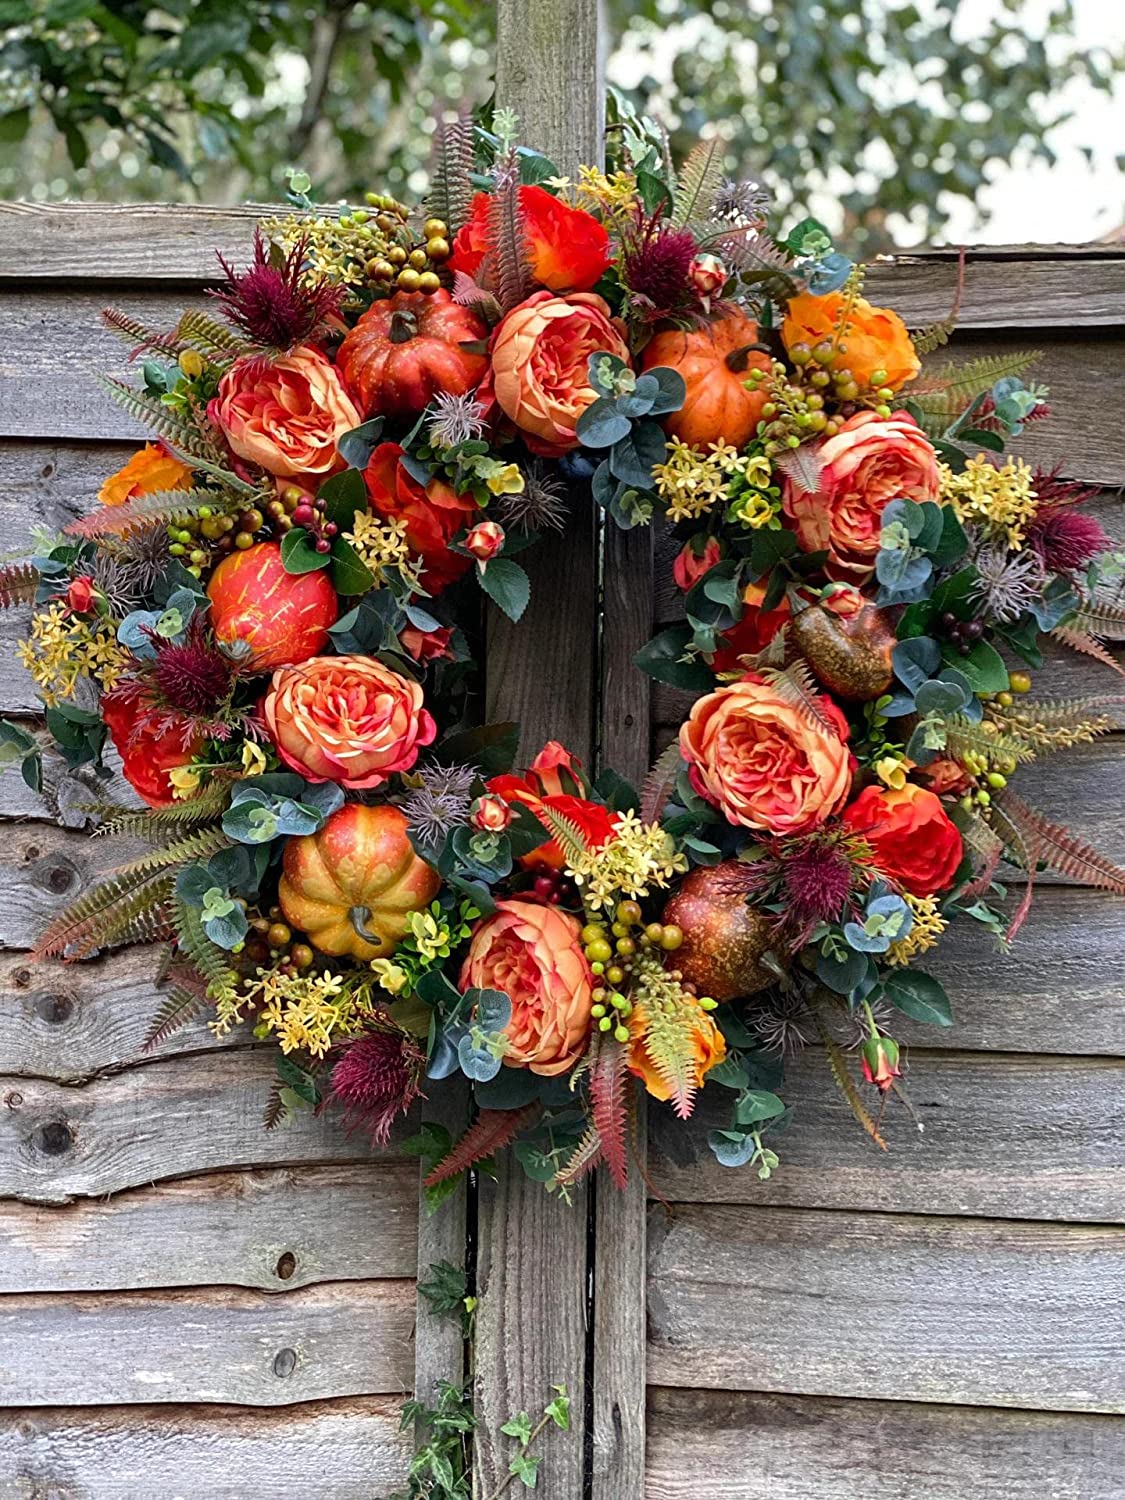 Fall Peony and Pumpkin Wreath - Autumn Year Round Wreaths for Front  Door,Artificial Front Door Wreath Thanksgiving Wreath for Home Farmhouse  Decor and